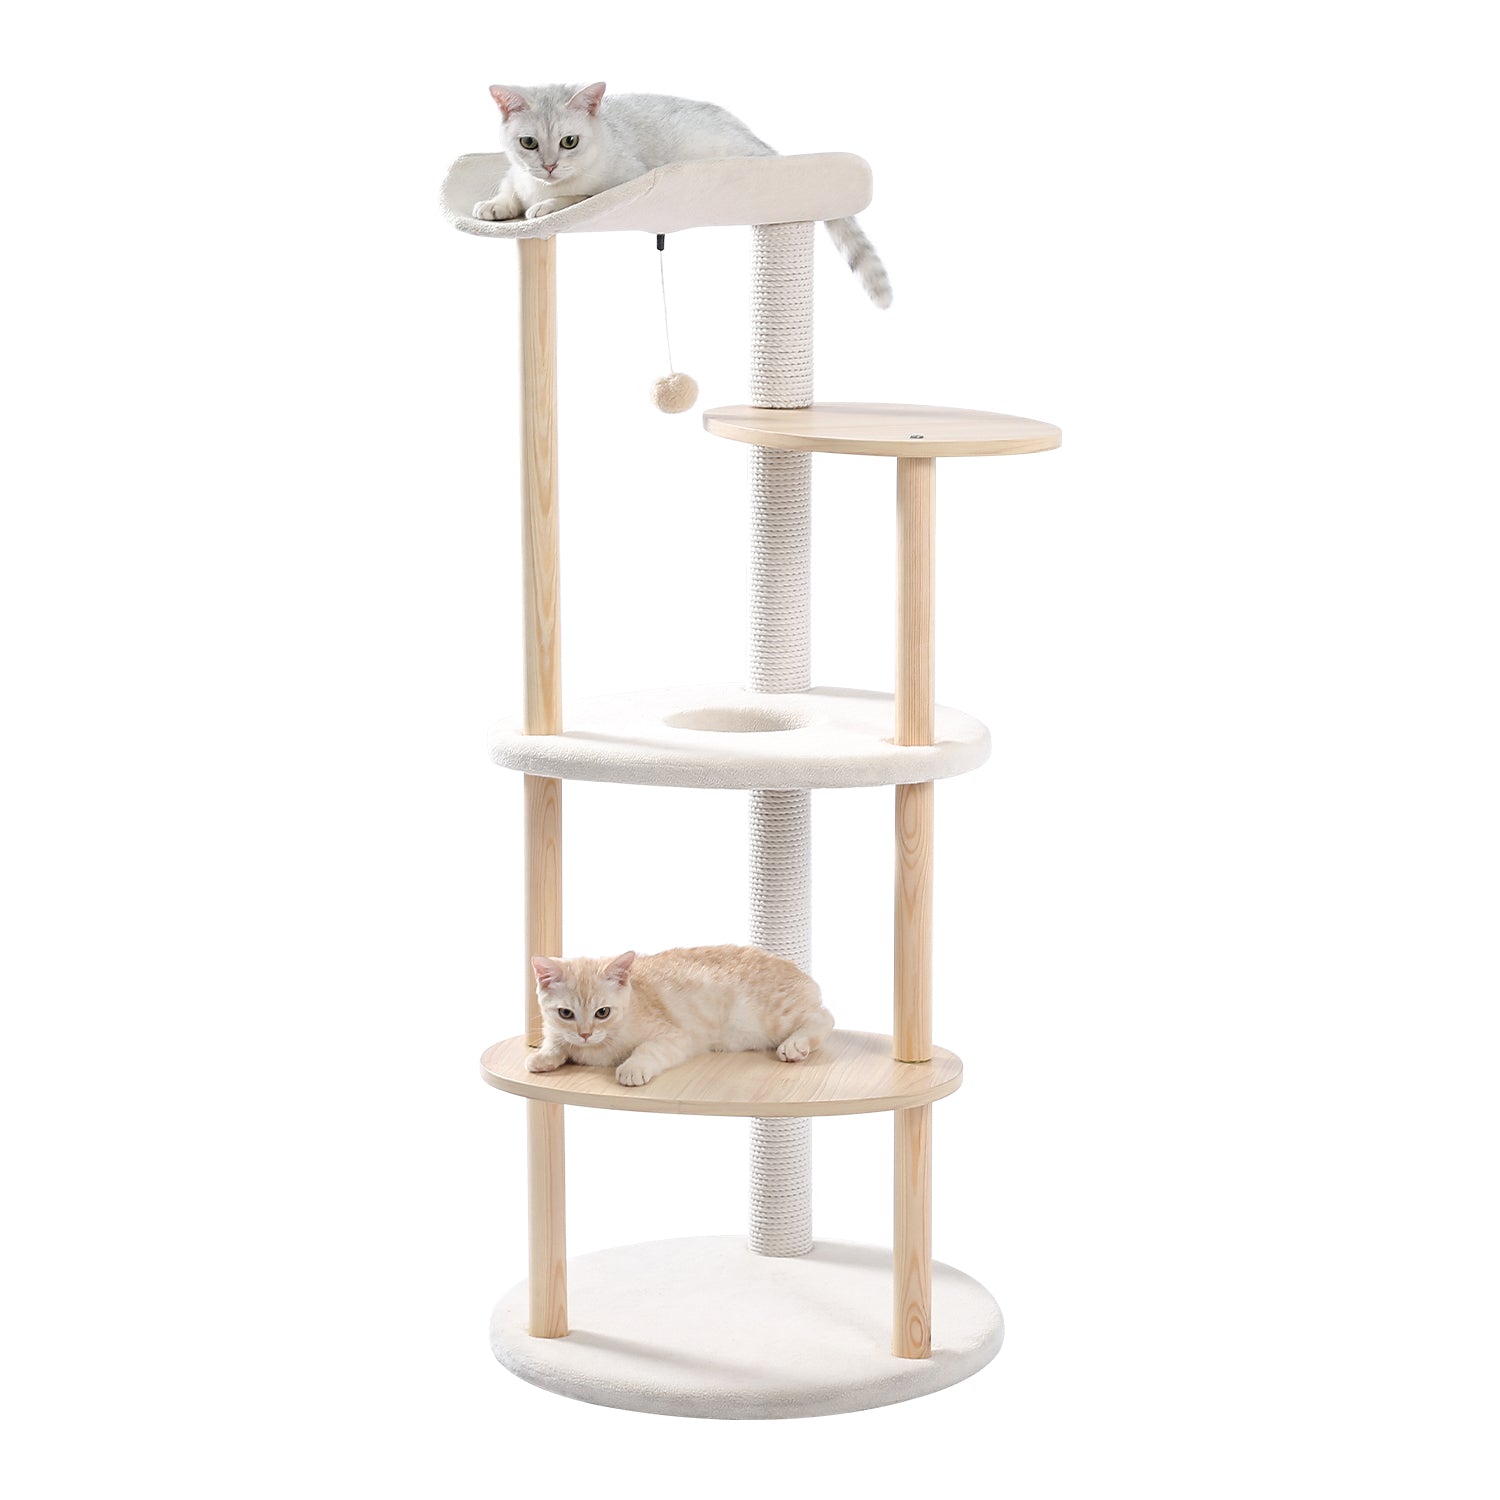 Multi-Level Cat Tree Modern Cat Tower Wooden Activity Center with Scratching Posts Beige - TOYSHIP